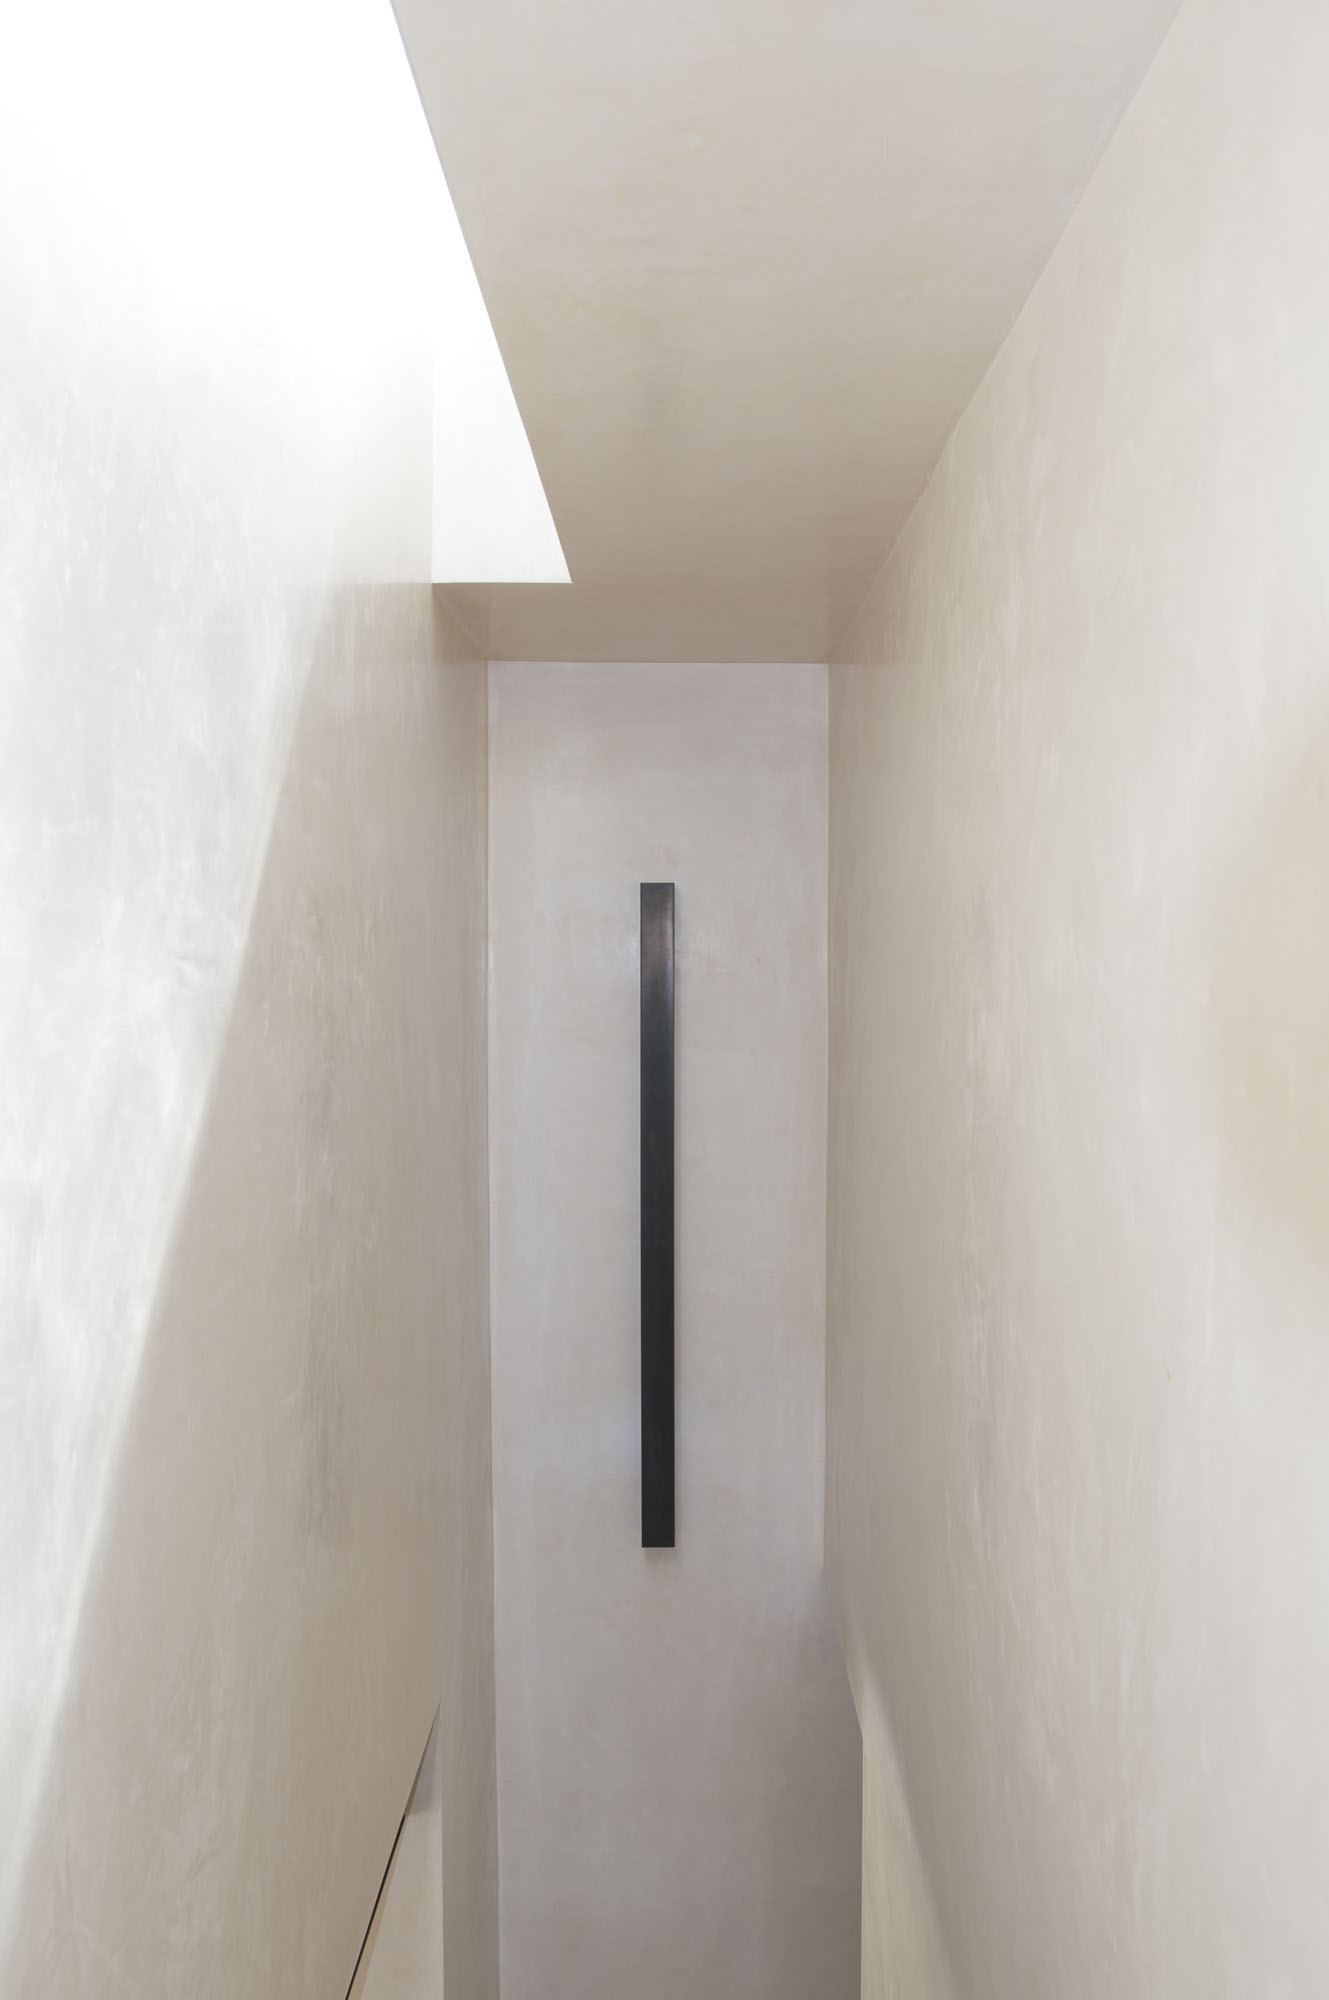   Vertical Column, 2014  Solid graphite, 84"&nbsp;x 4” x 4”  Private Collection 